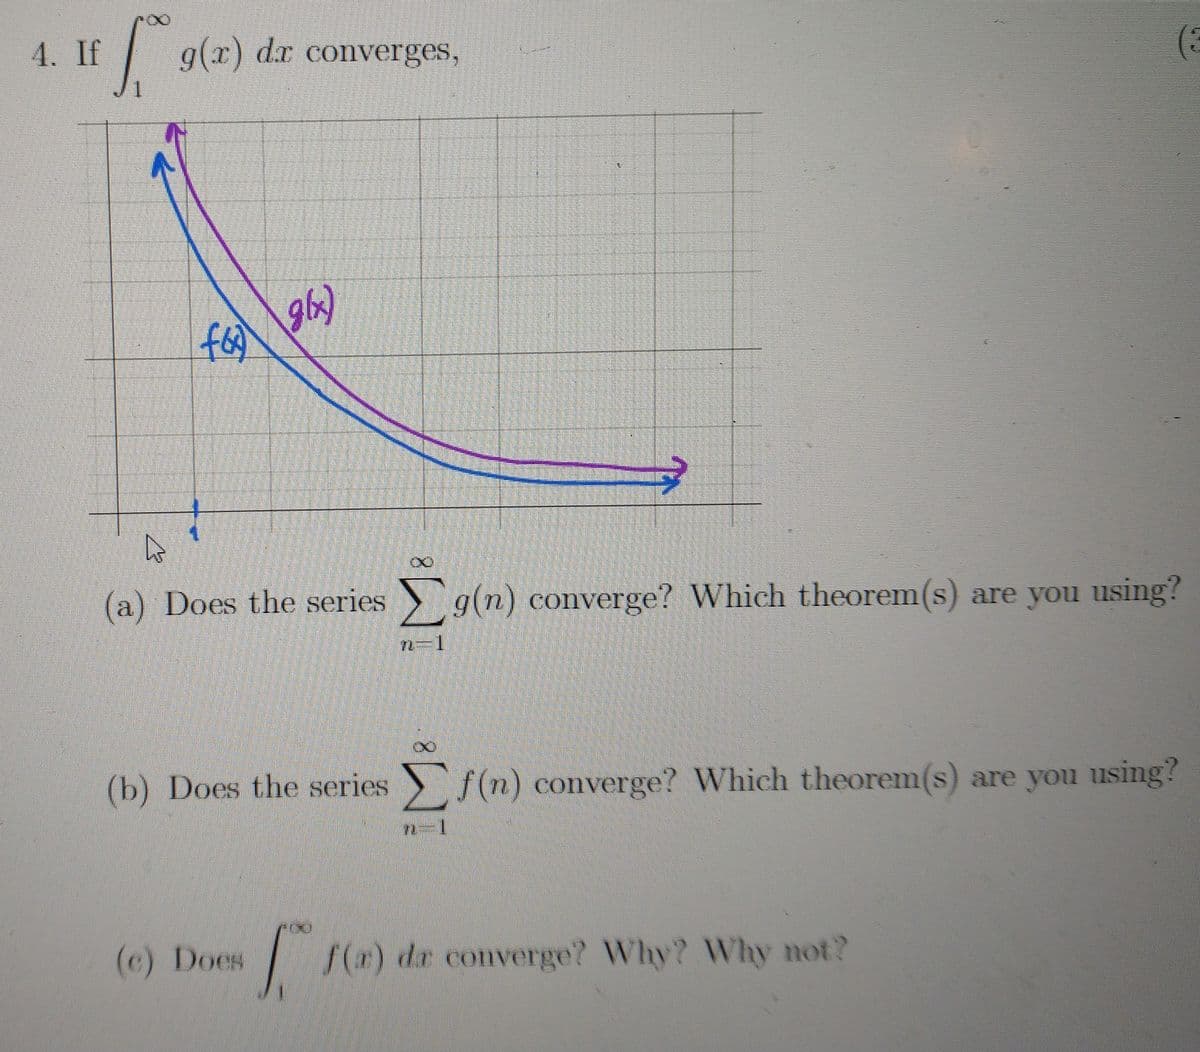 4. If
g(x)
dx converges,
gb)
(a) Does the series g(n) converge? Which theorem(s) are you using?
(b) Does the series f(n) converge? Which theorem(s) are you using?
(c) Does
(r) dr converge? Why? Why not?
